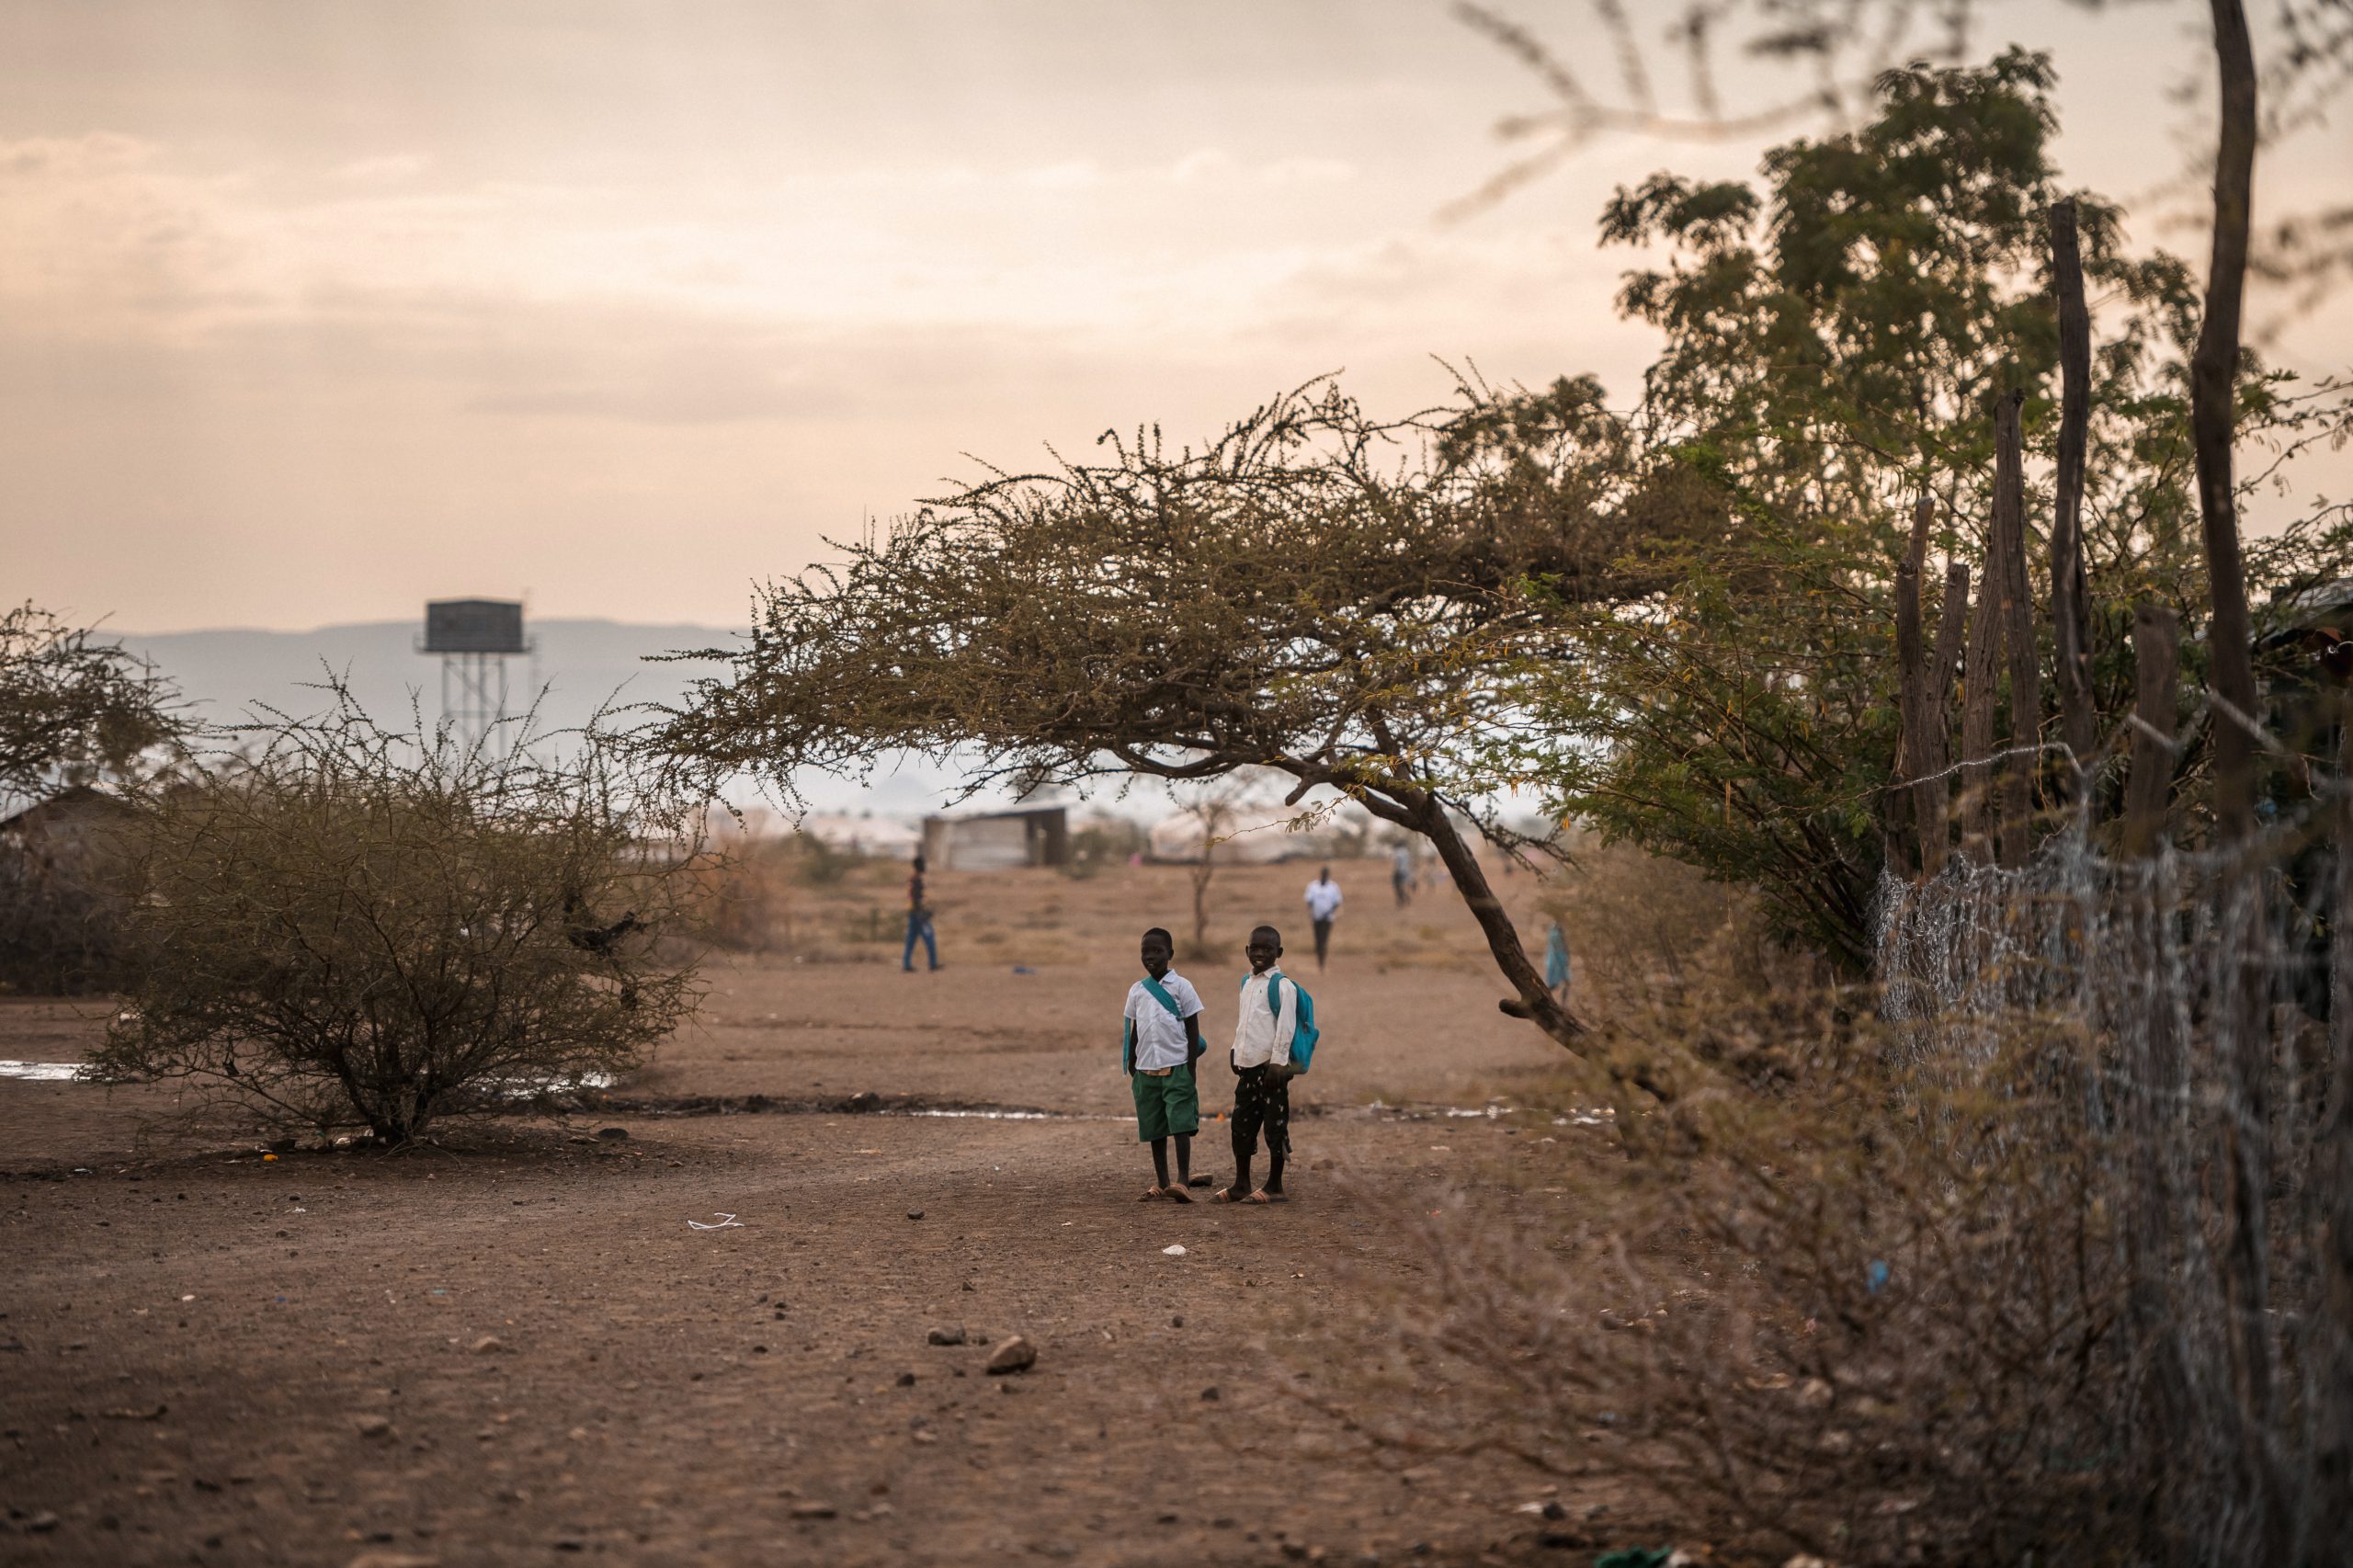 Two boys walking to school in a refugee settlement